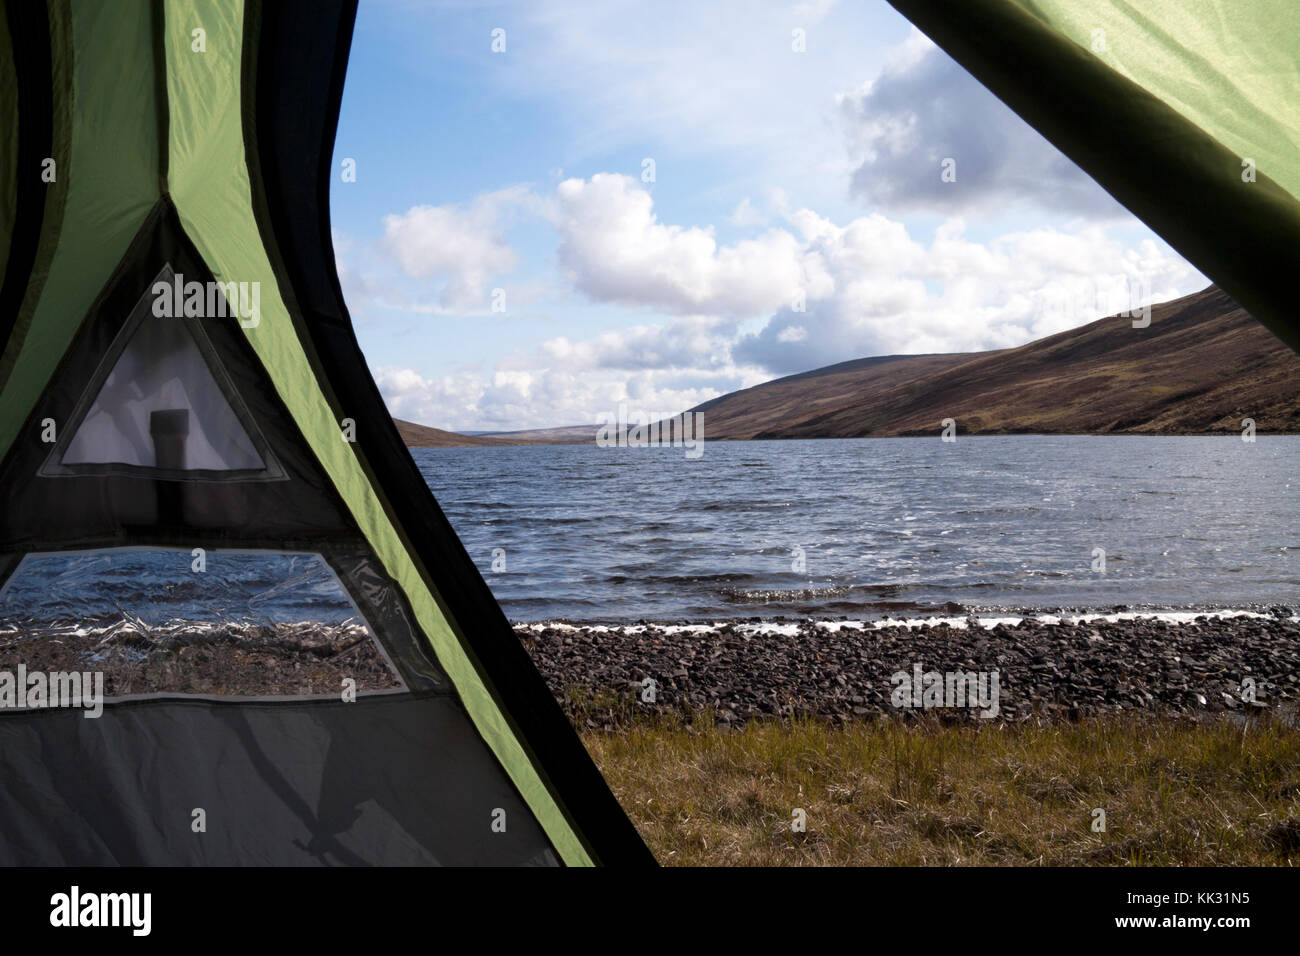 A view of a remote highland loch from a tent pitched near the water. Stock Photo